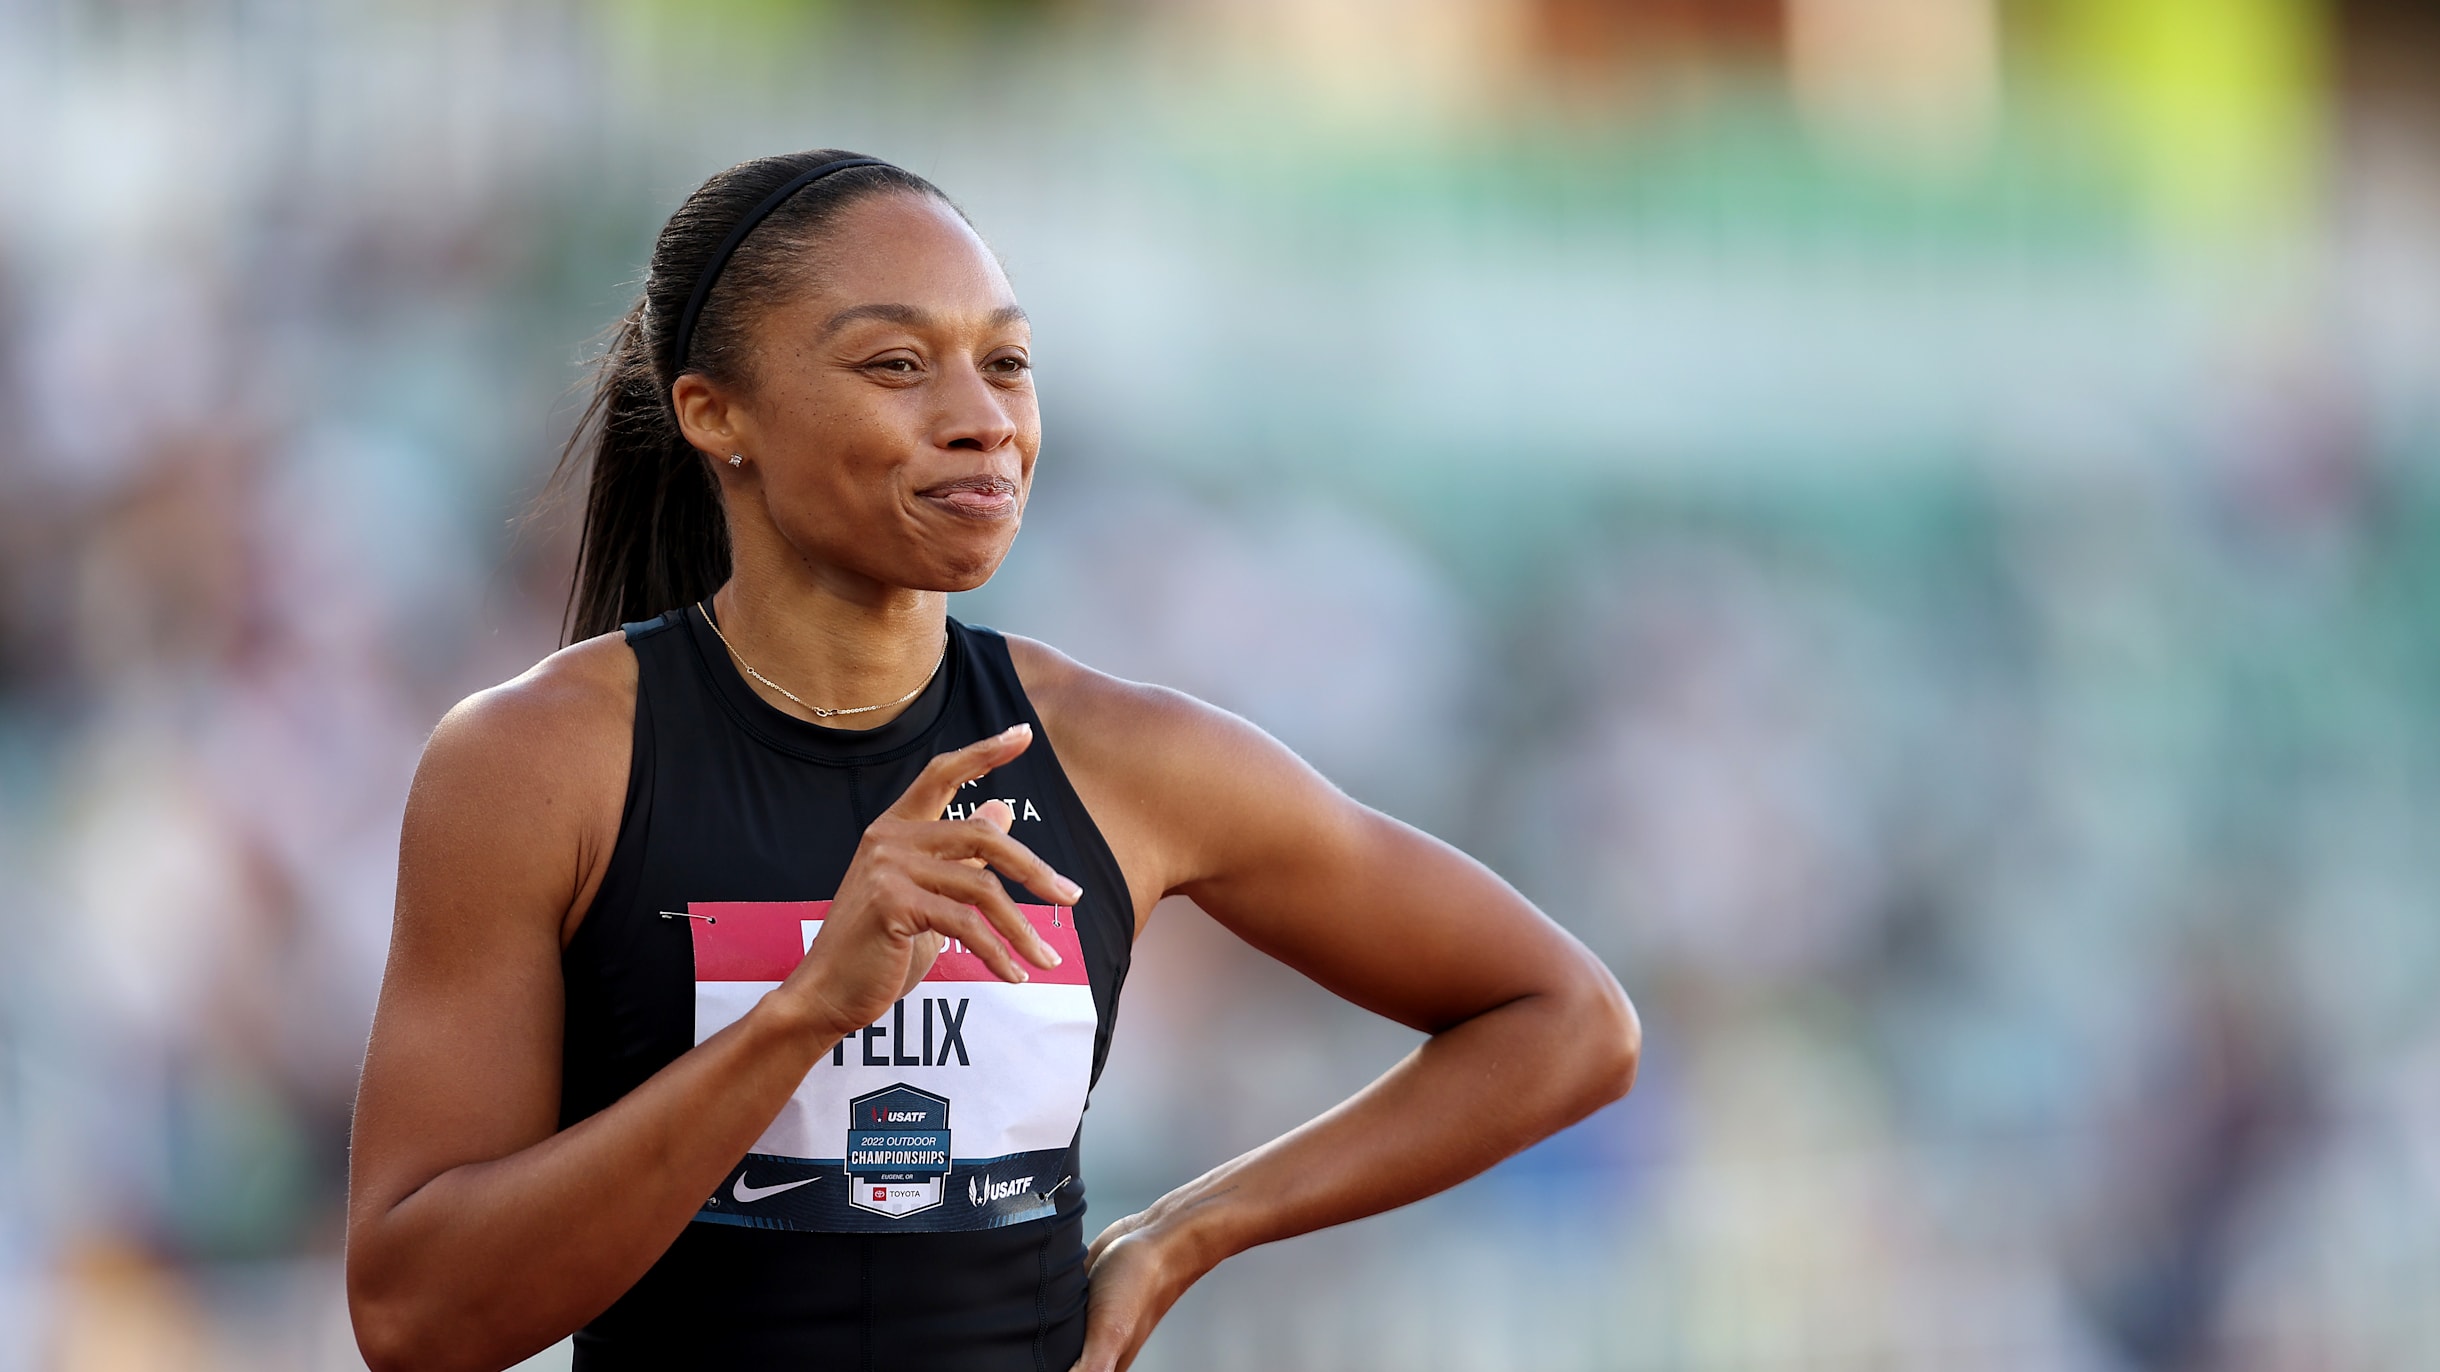 Allyson Felix Becomes the Most Decorated U.S. Olympic Track